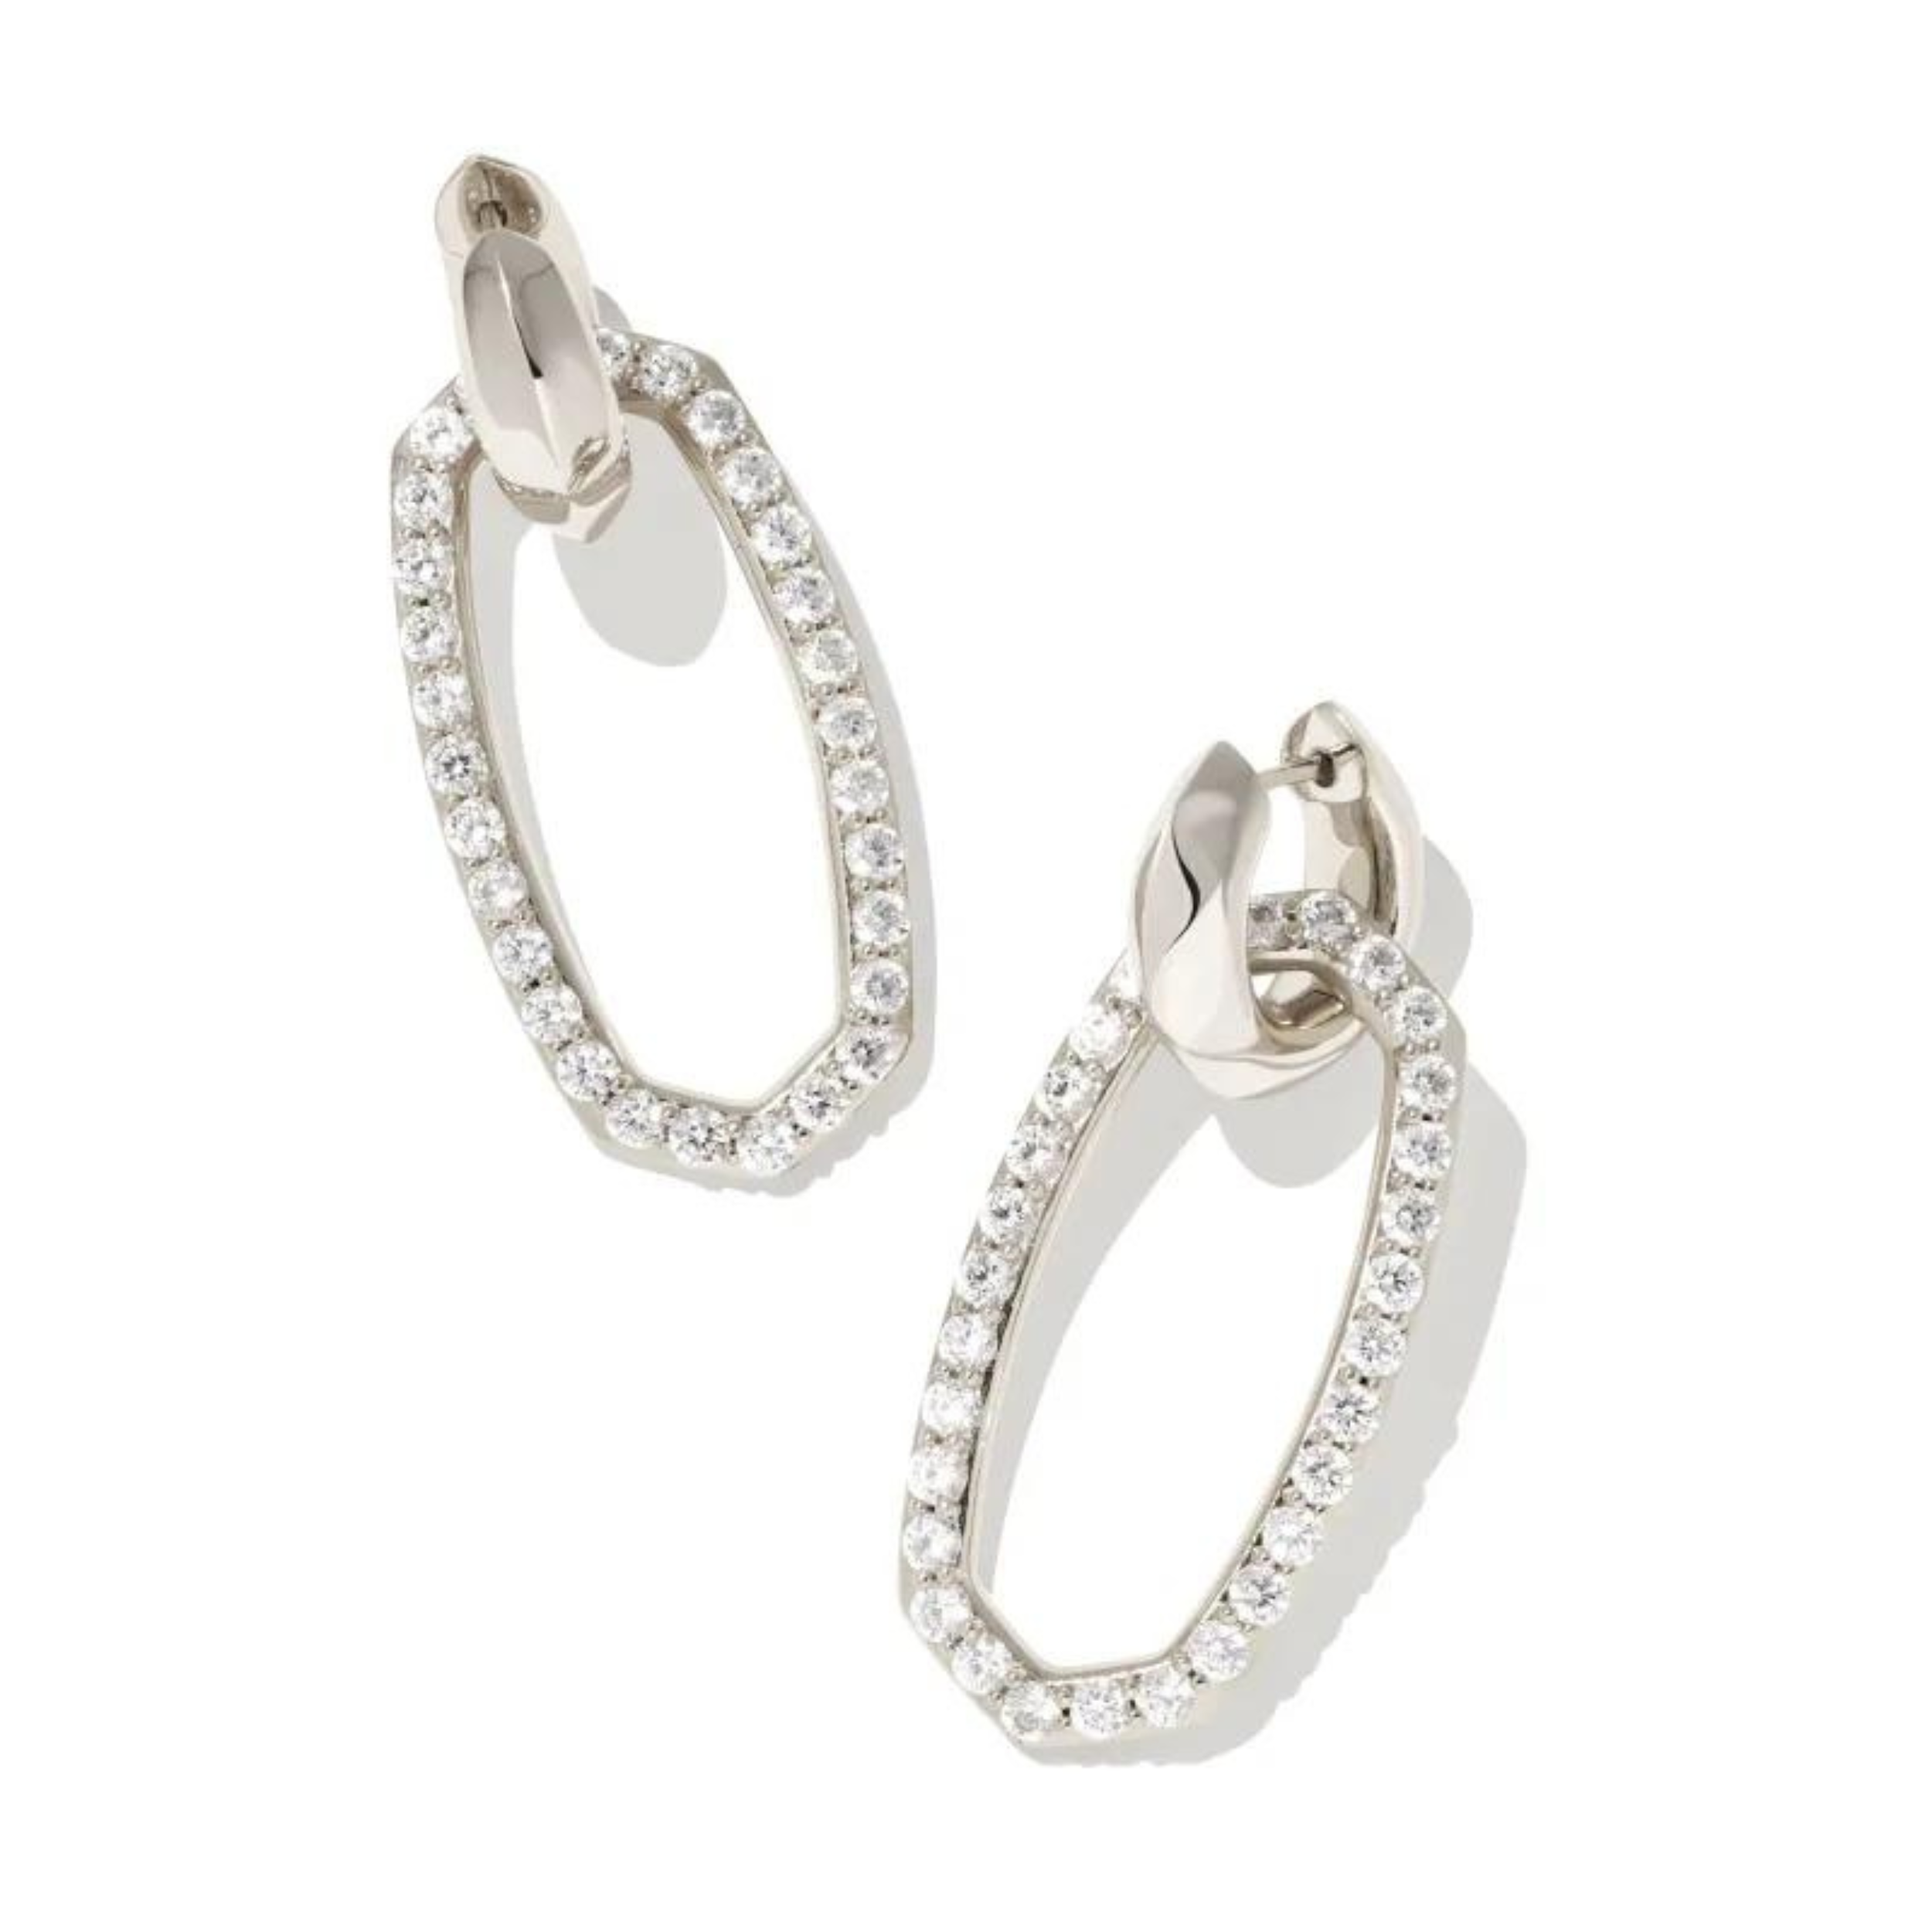 Silver hoop dangle earrings with white crystals pictured on a white background. 